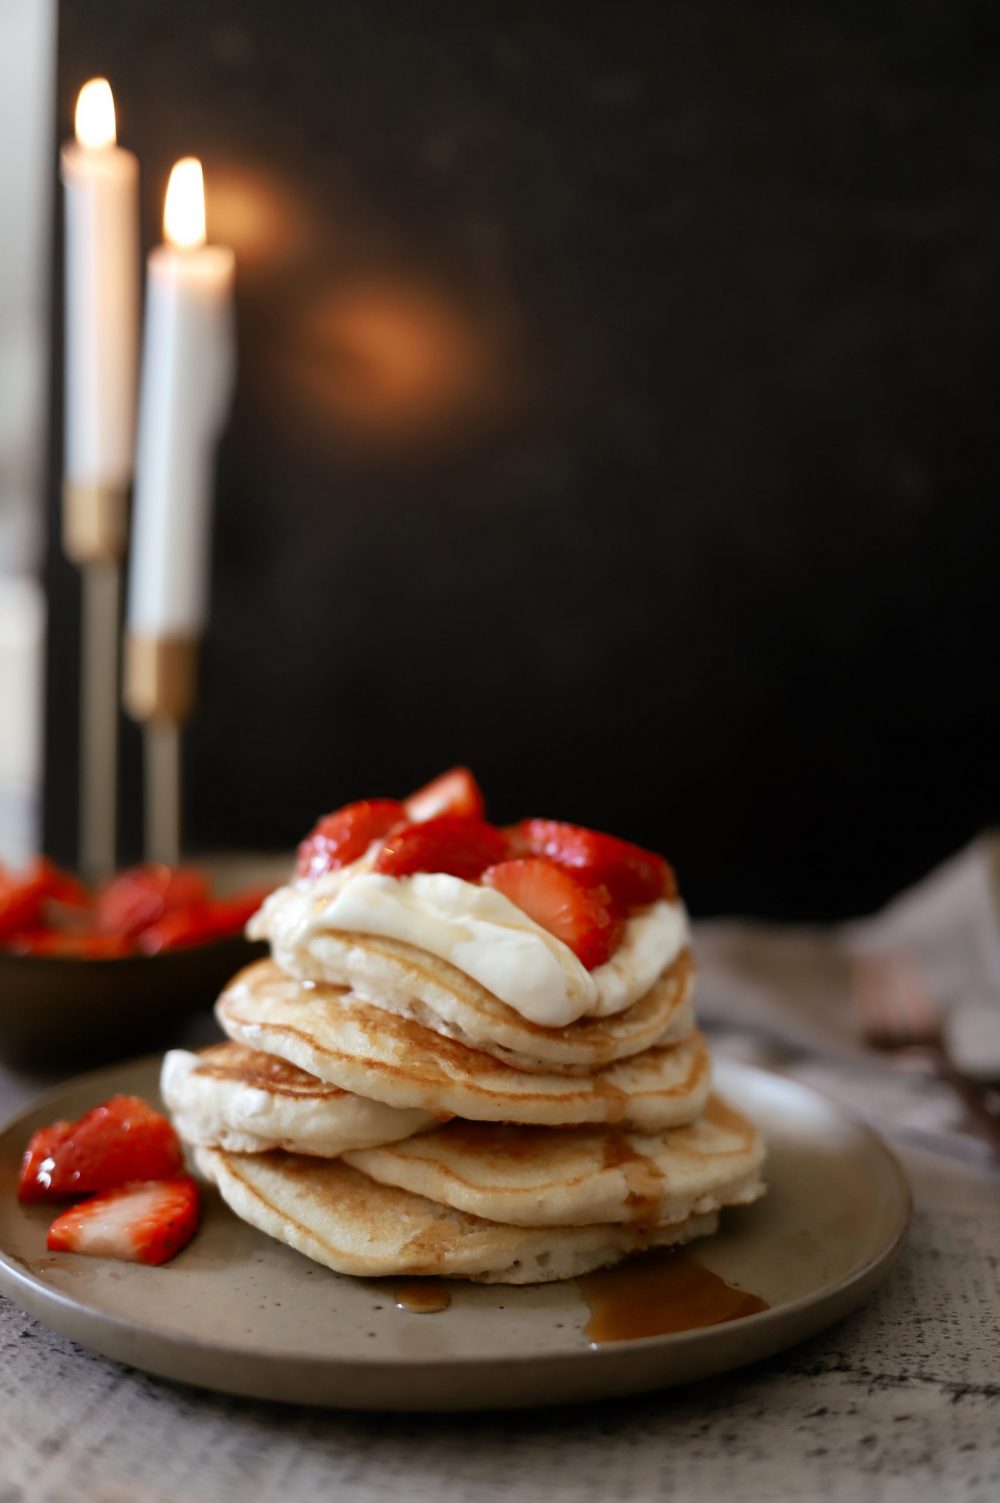 Easy Buttermilk Pancakes with Gingered Strawberries and Cream, a recipe featured by top FL lifestyle blogger, Tabitha Blue of Fresh Mommy Blog.